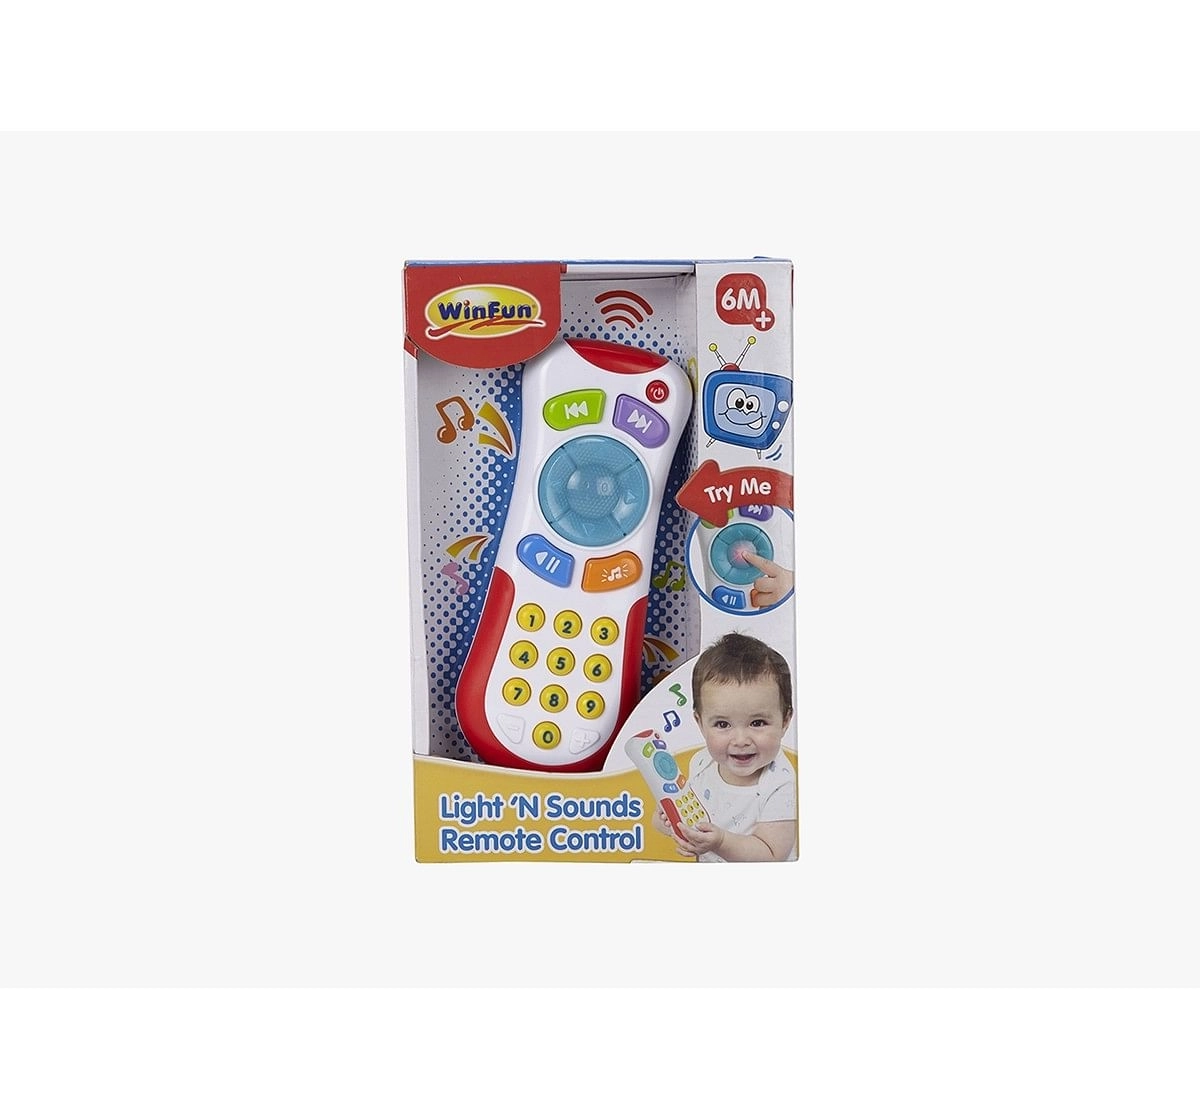 Winfun Light  N Sounds Remote Control Learning Toys for Kids age 3Y+ 